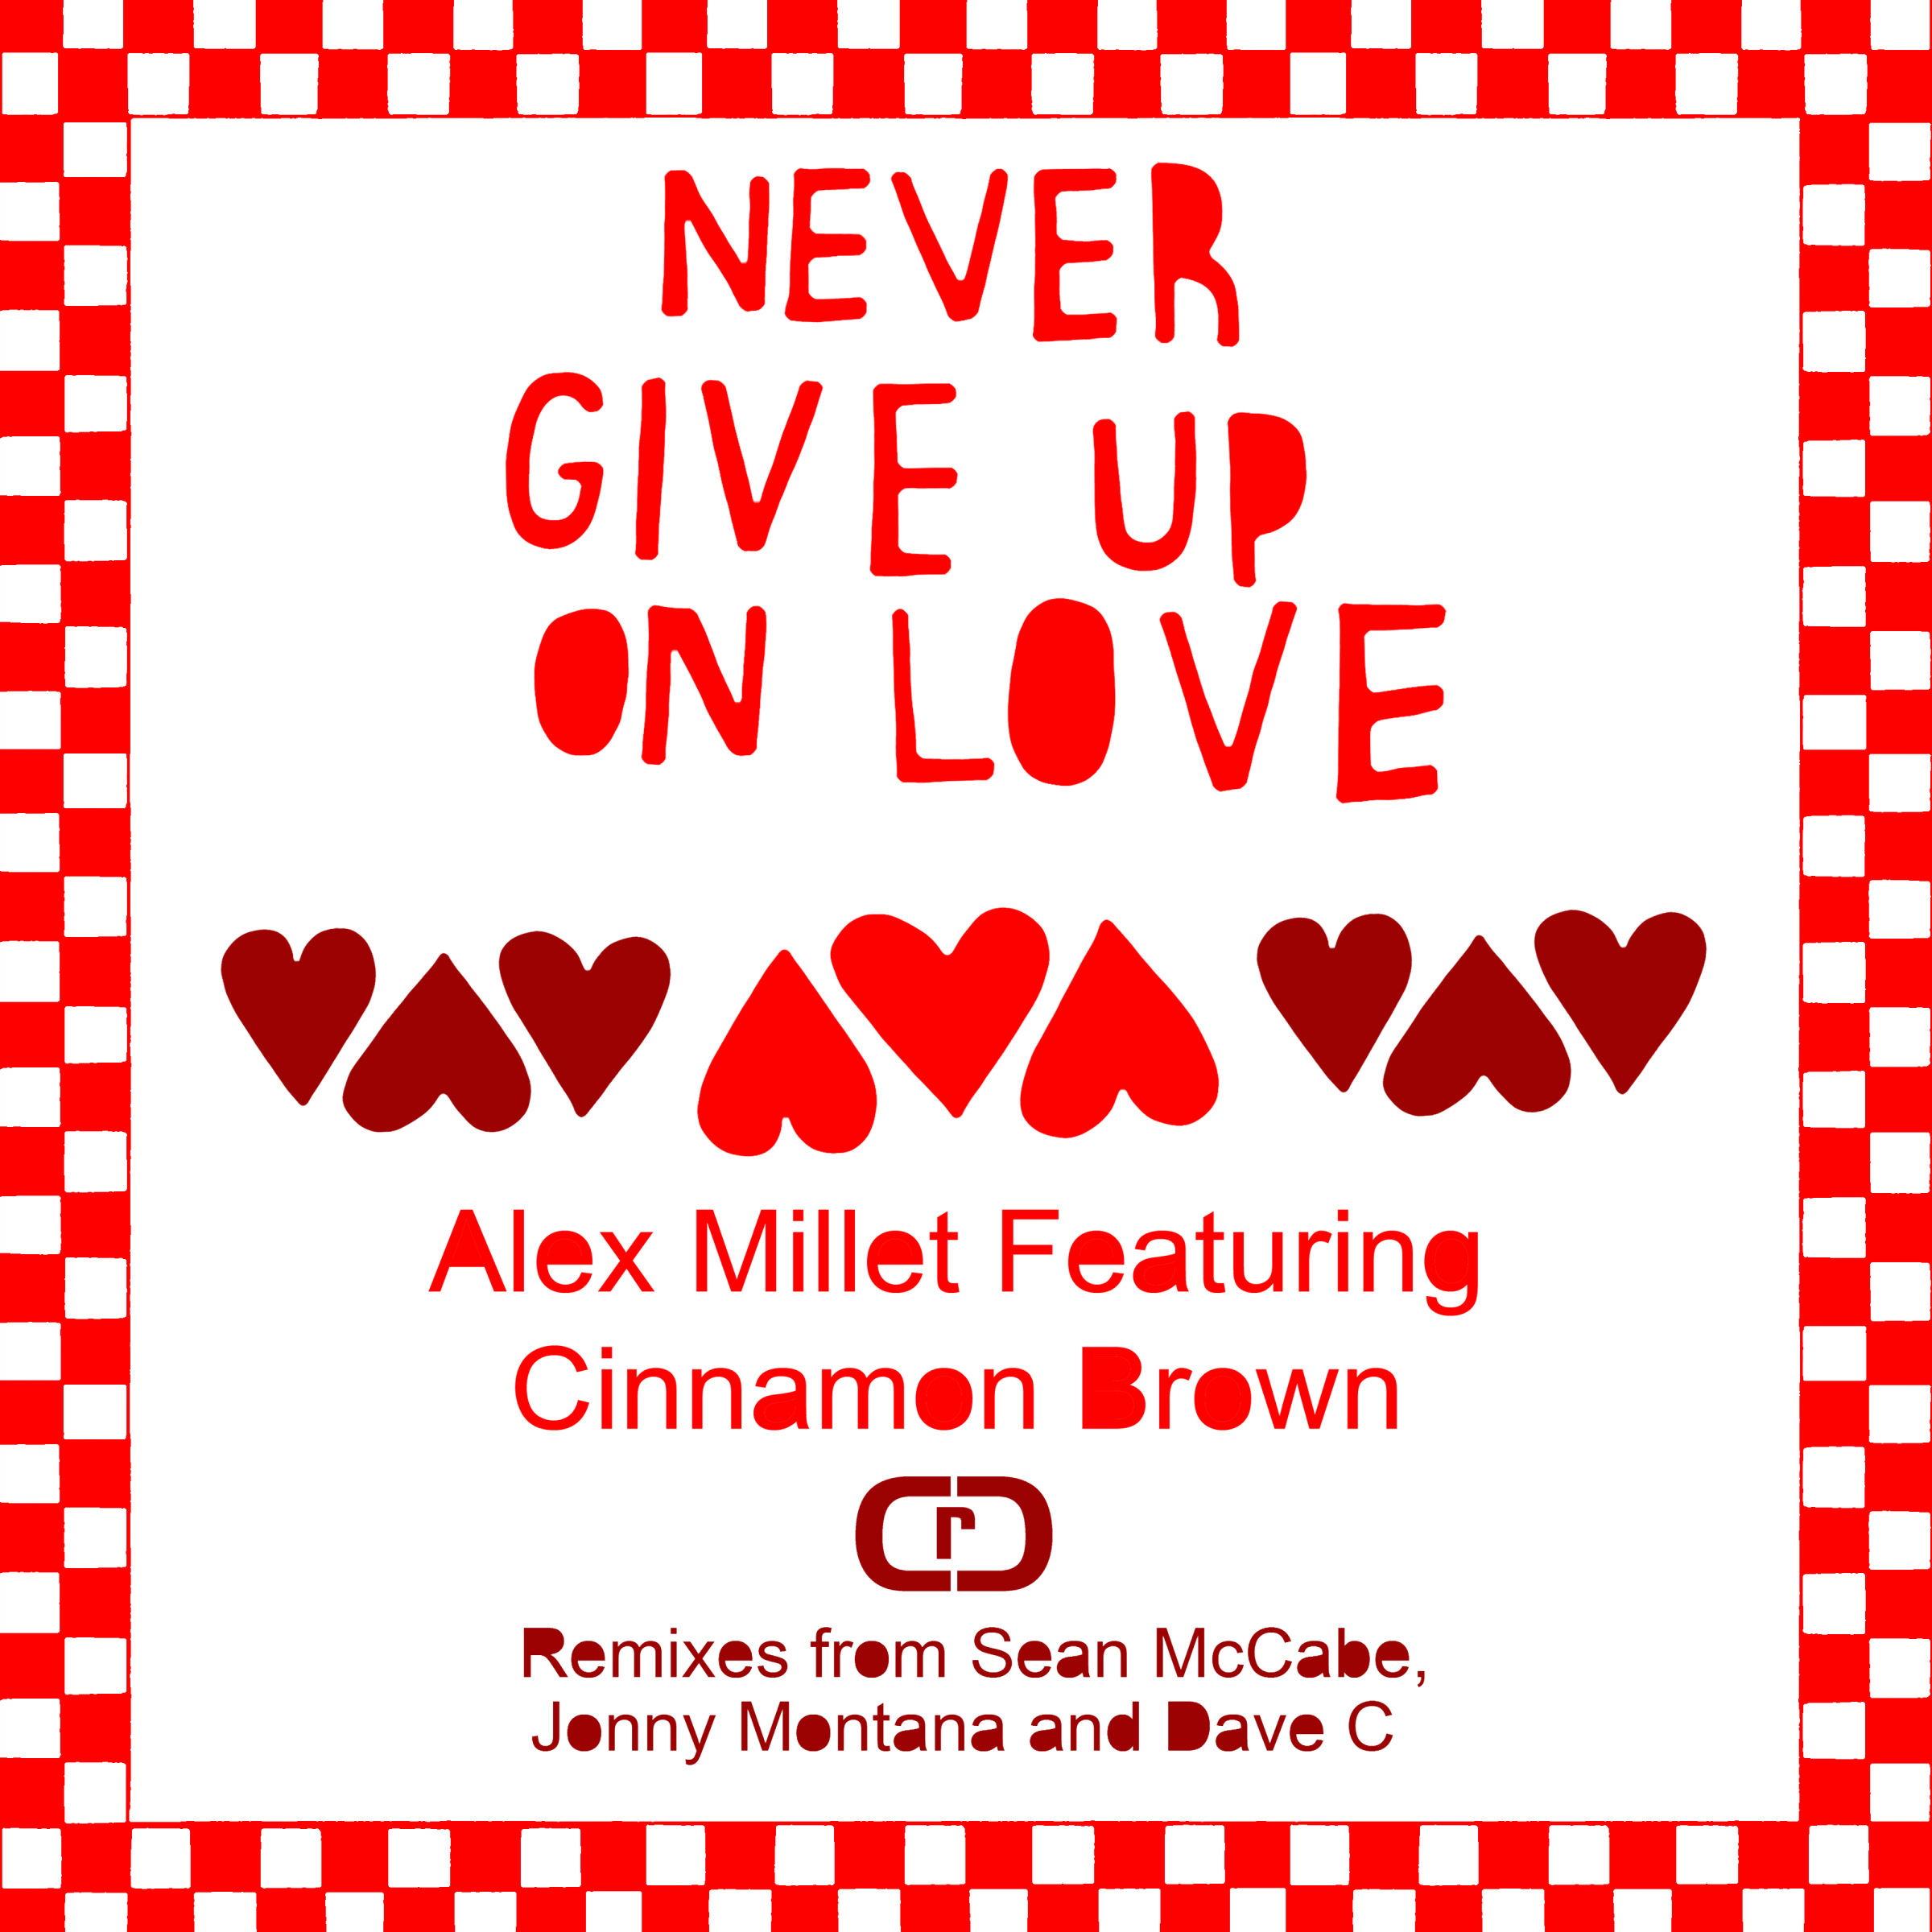 Alex Love. Never give up песня. Give Love give. Give up on Love.